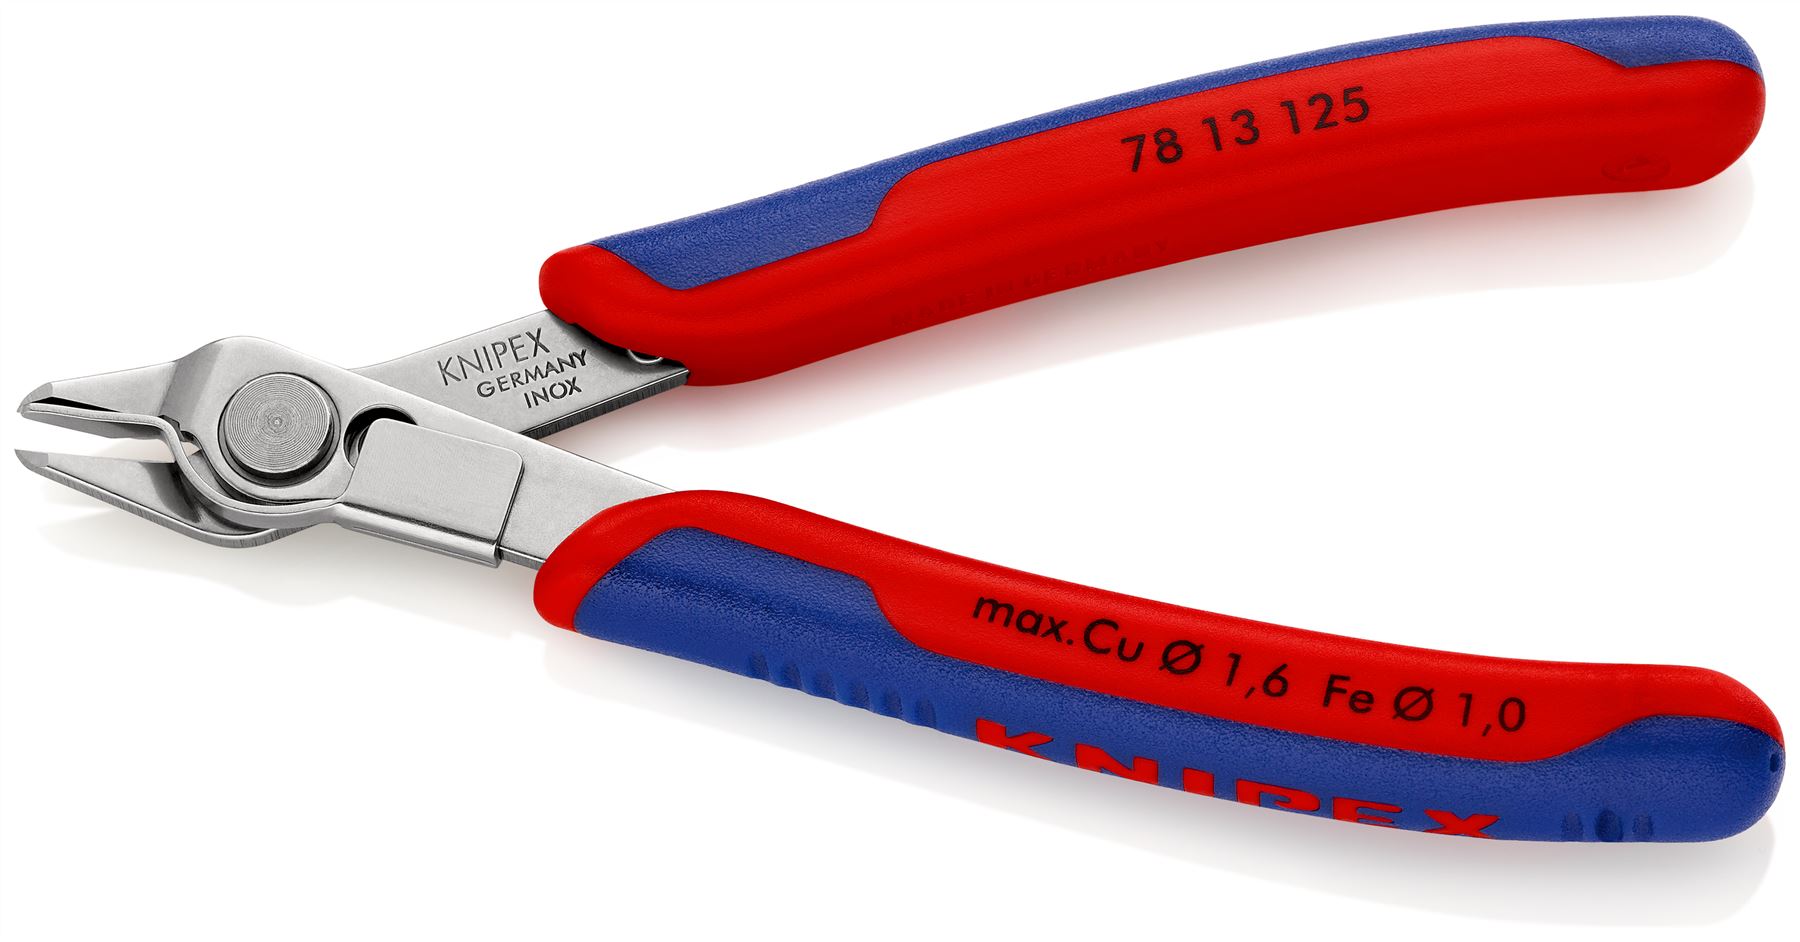 KNIPEX Electronics Super Knips Precision Cutting Pliers 125mm Multi Component Grips 78 13 125 SB